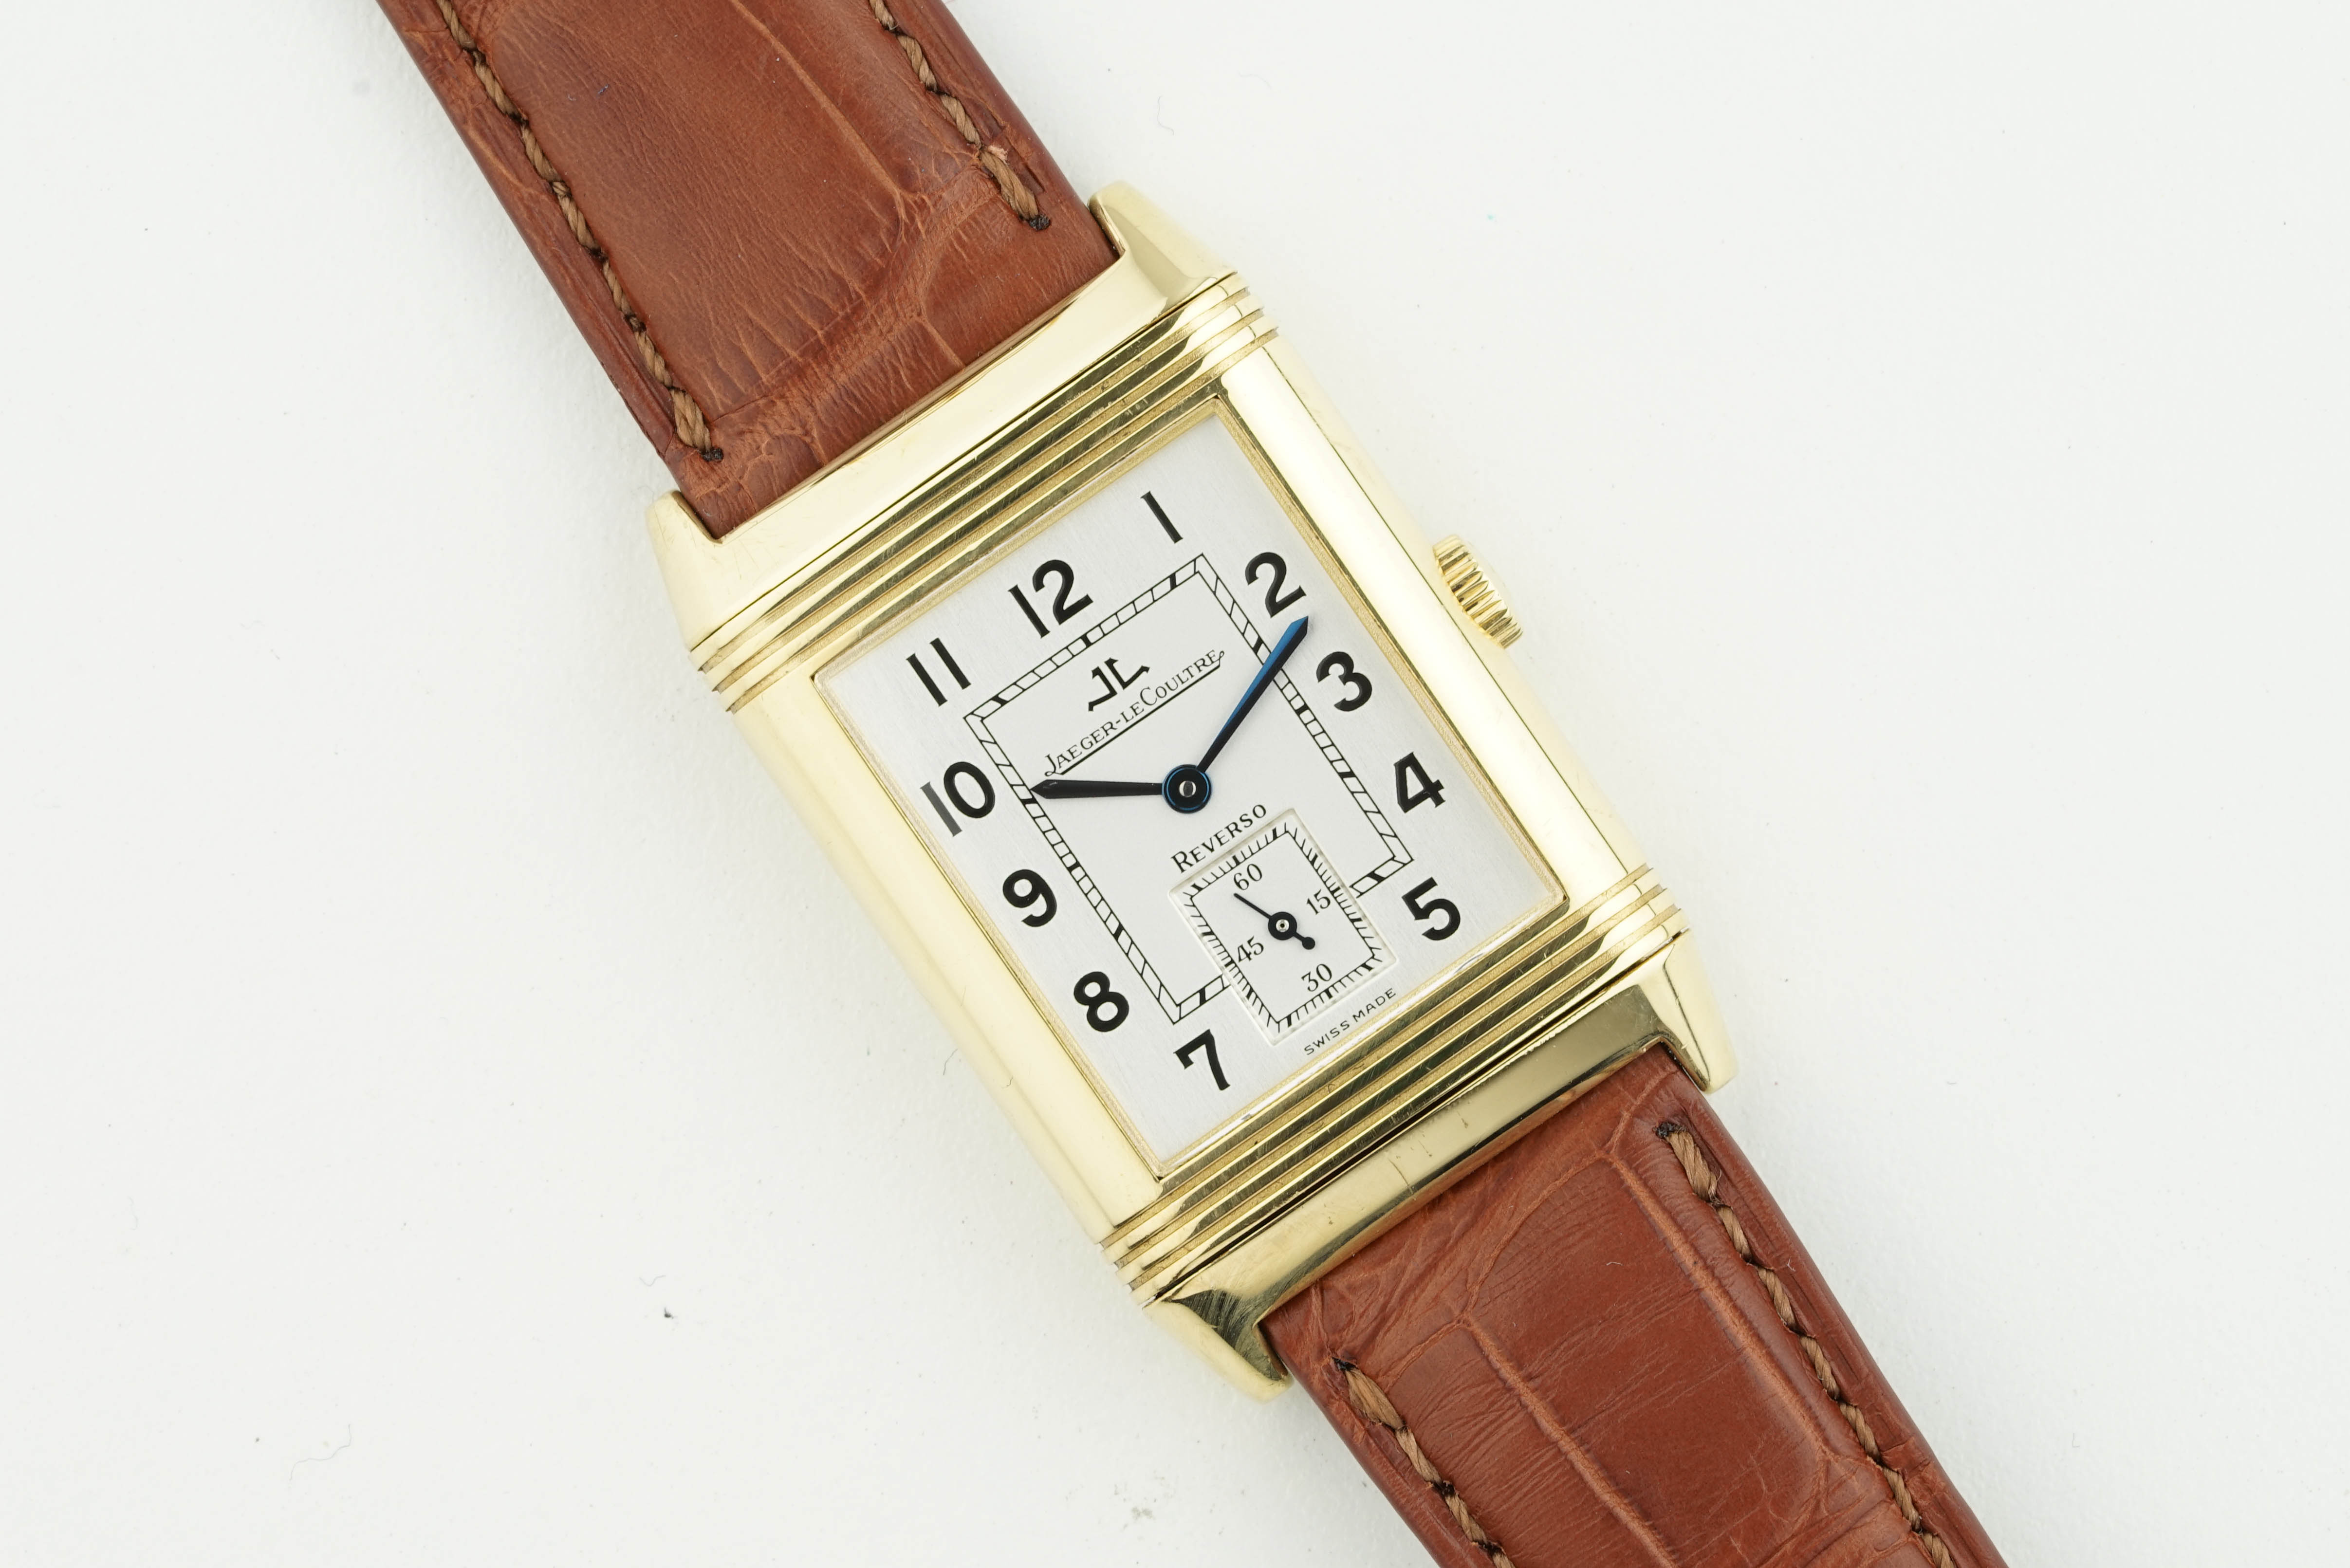 JAEGER LE COULTRE REVERSO GRANDE TAILLE 18CT GOLD W/ GUARANTEE PAPERS REF. 270162, rectangular white